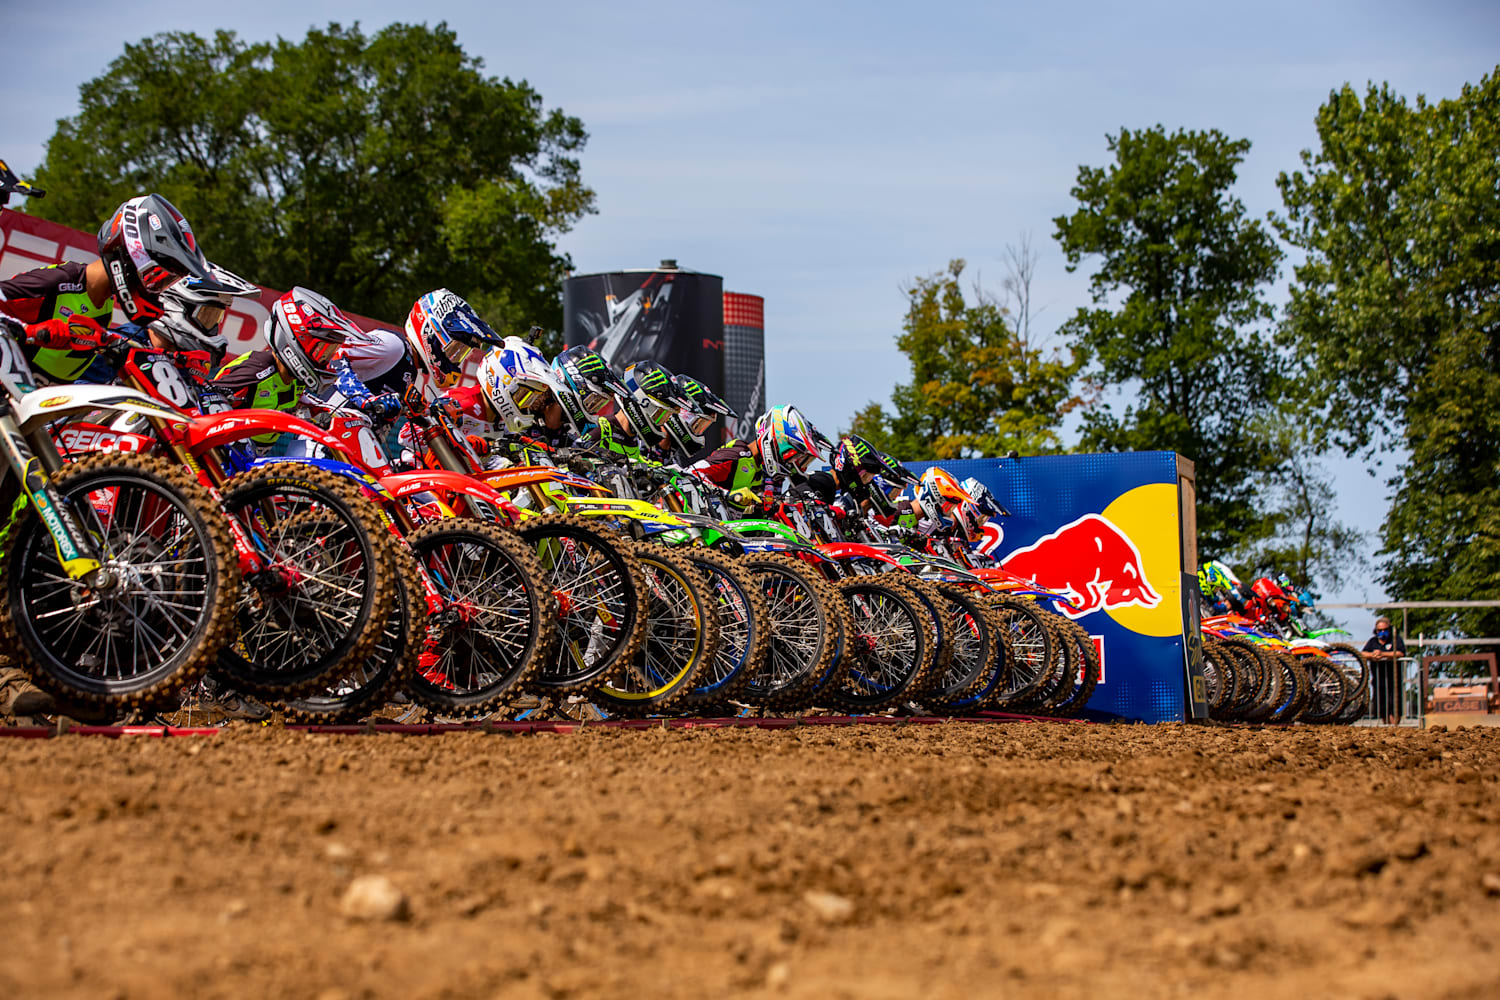 10 Motocross Practice Tips To Speed Up Red Bull